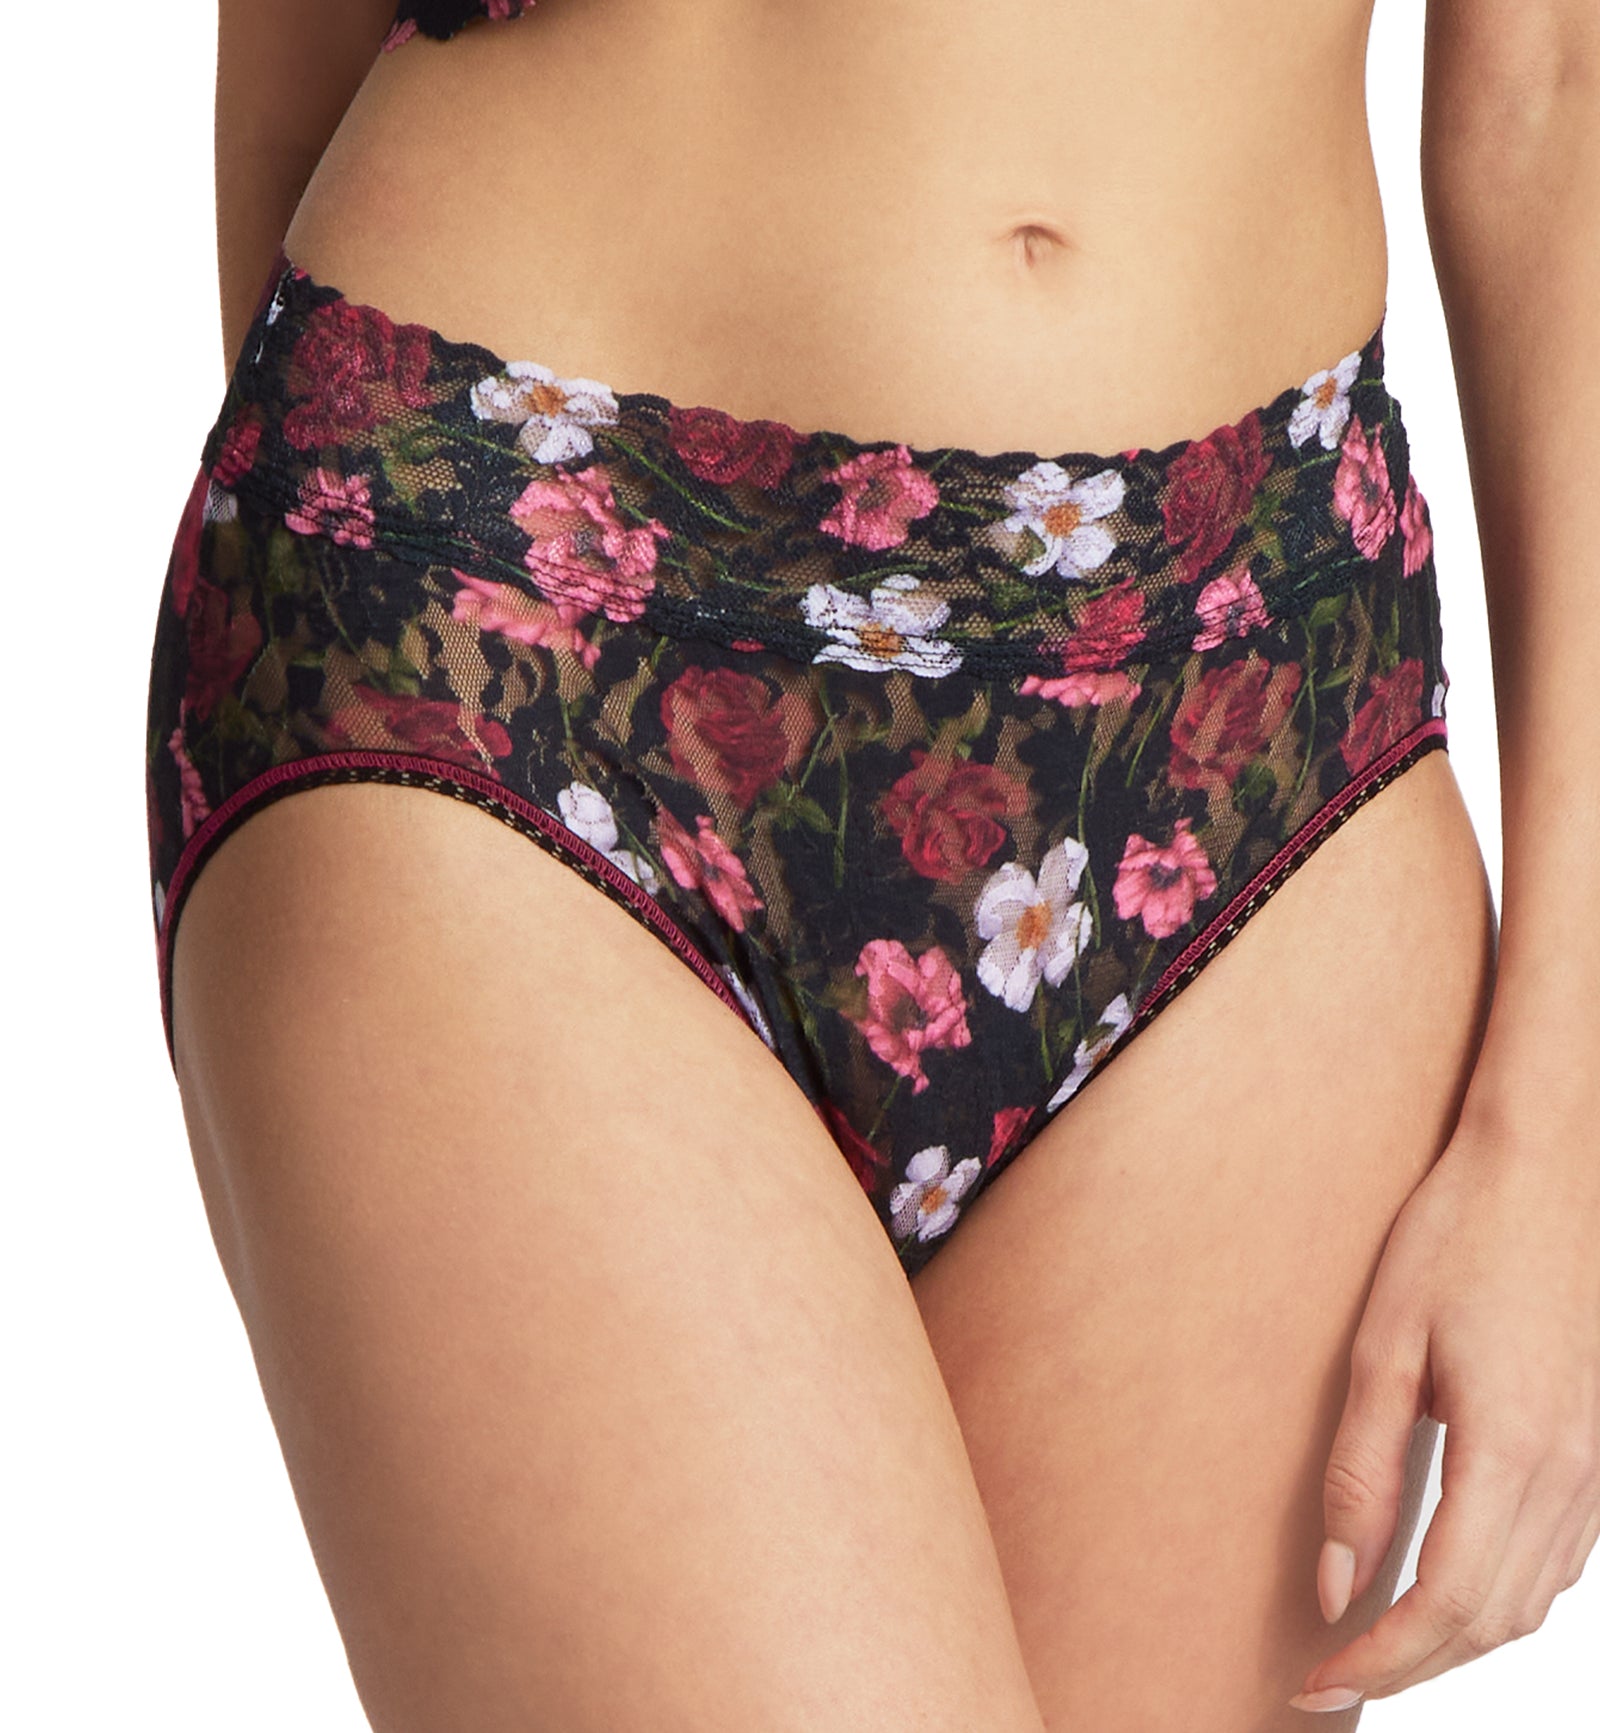 Hanky Panky Signature Lace Printed French Brief (PR461),Small,Am I Dreaming - Am I Dreaming,Small